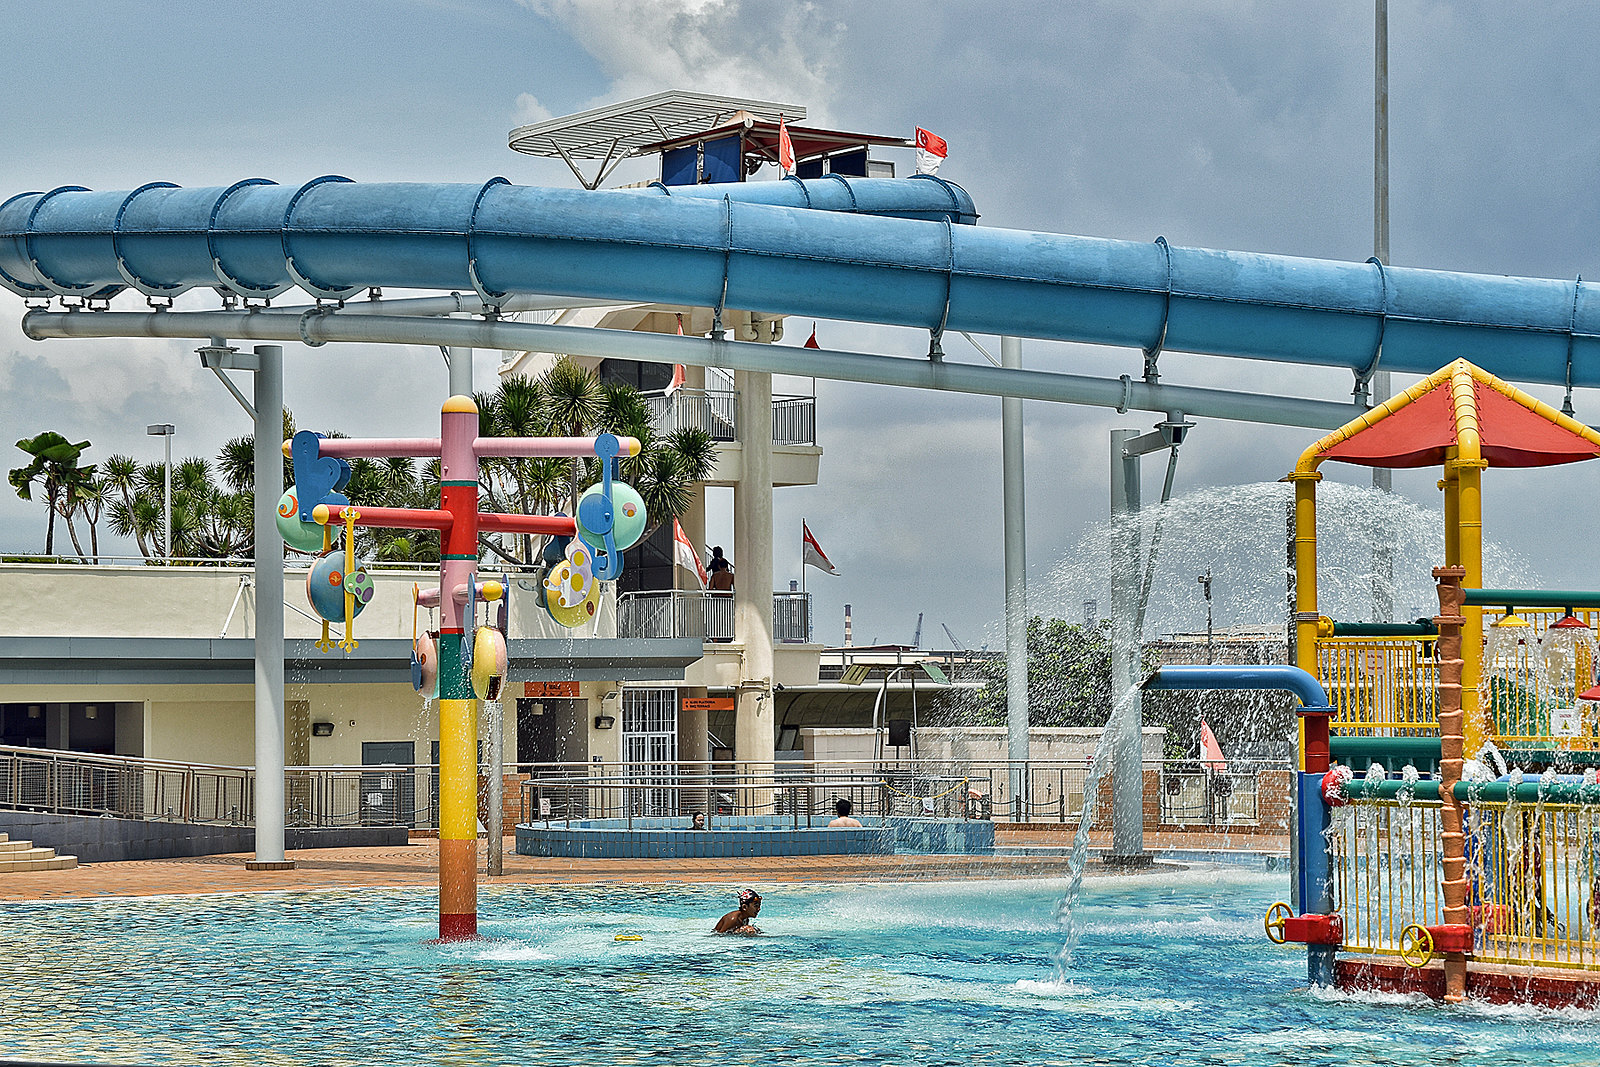 A snapshot of children-friendly water play amenities in Jurong West Swimming Complex